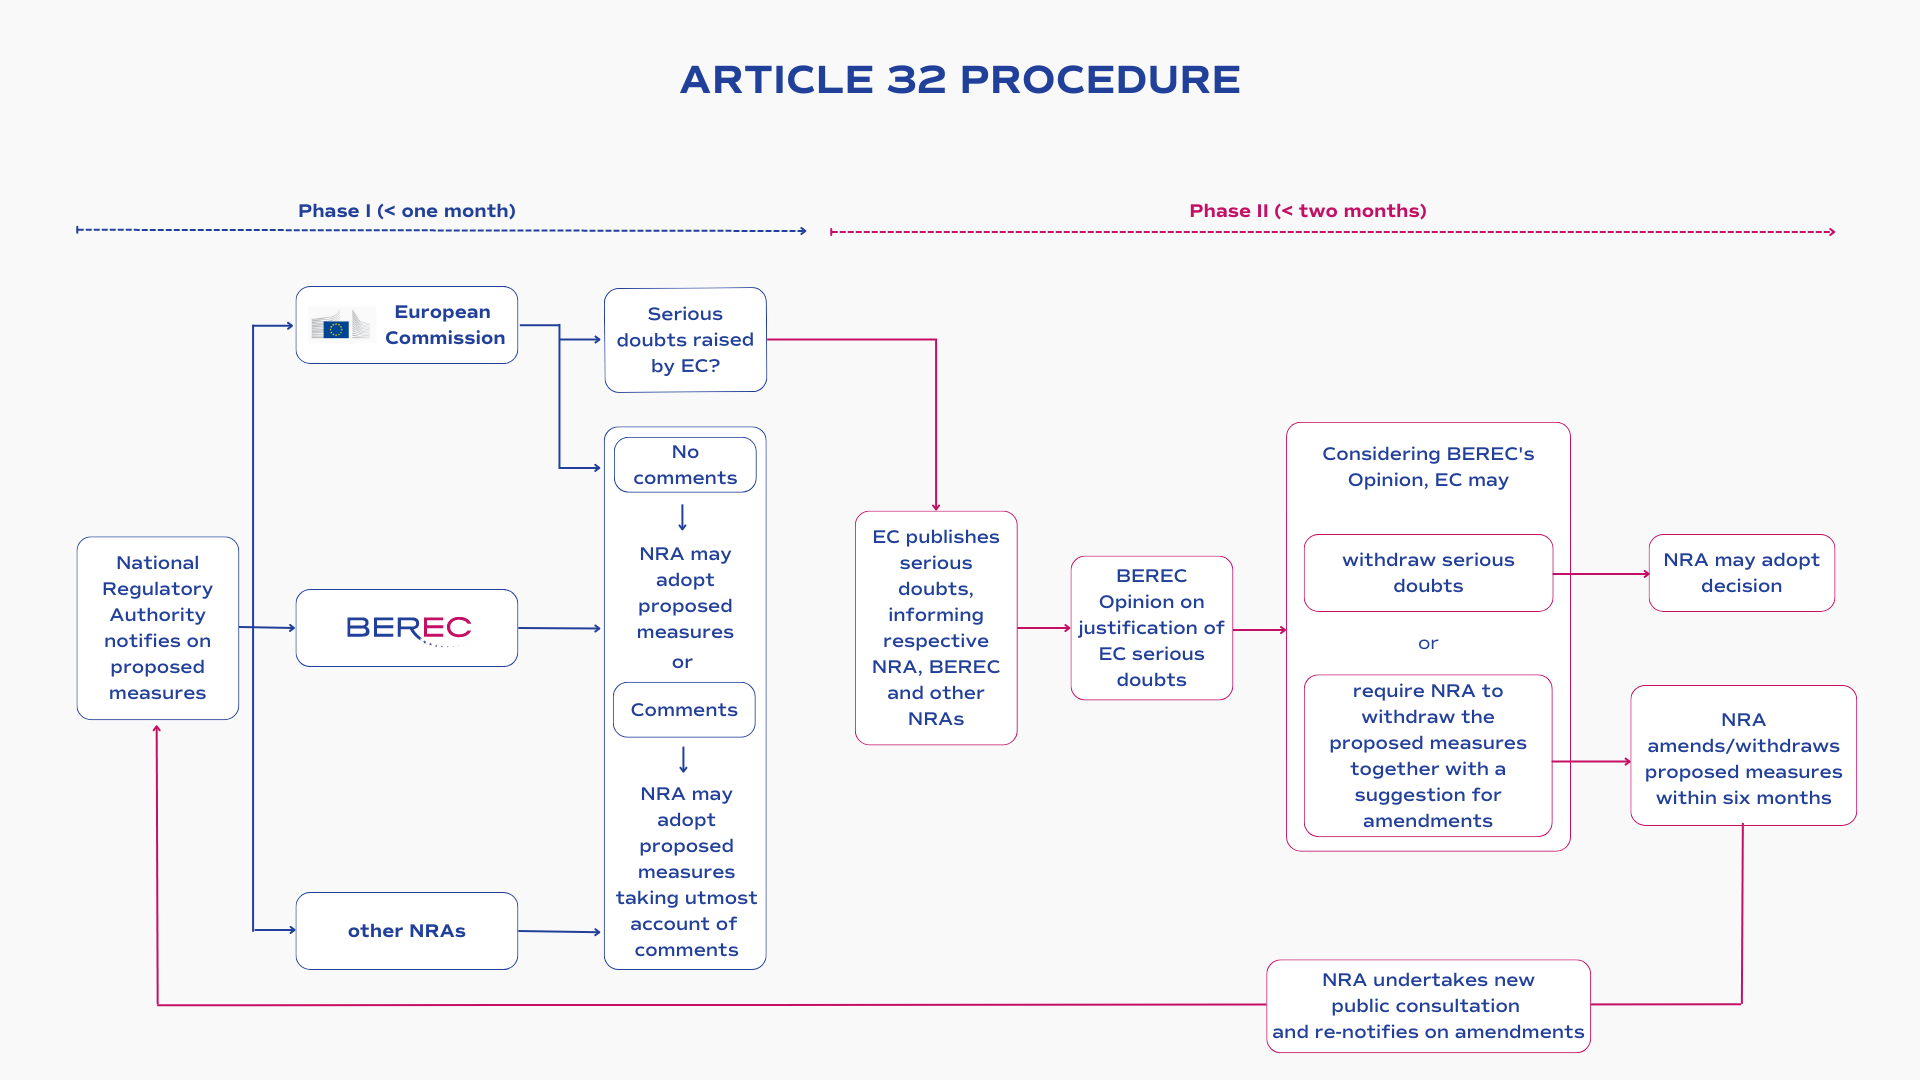 The image contains a flow-chart of the Article 32 procedure, which is described in text form on this web page.